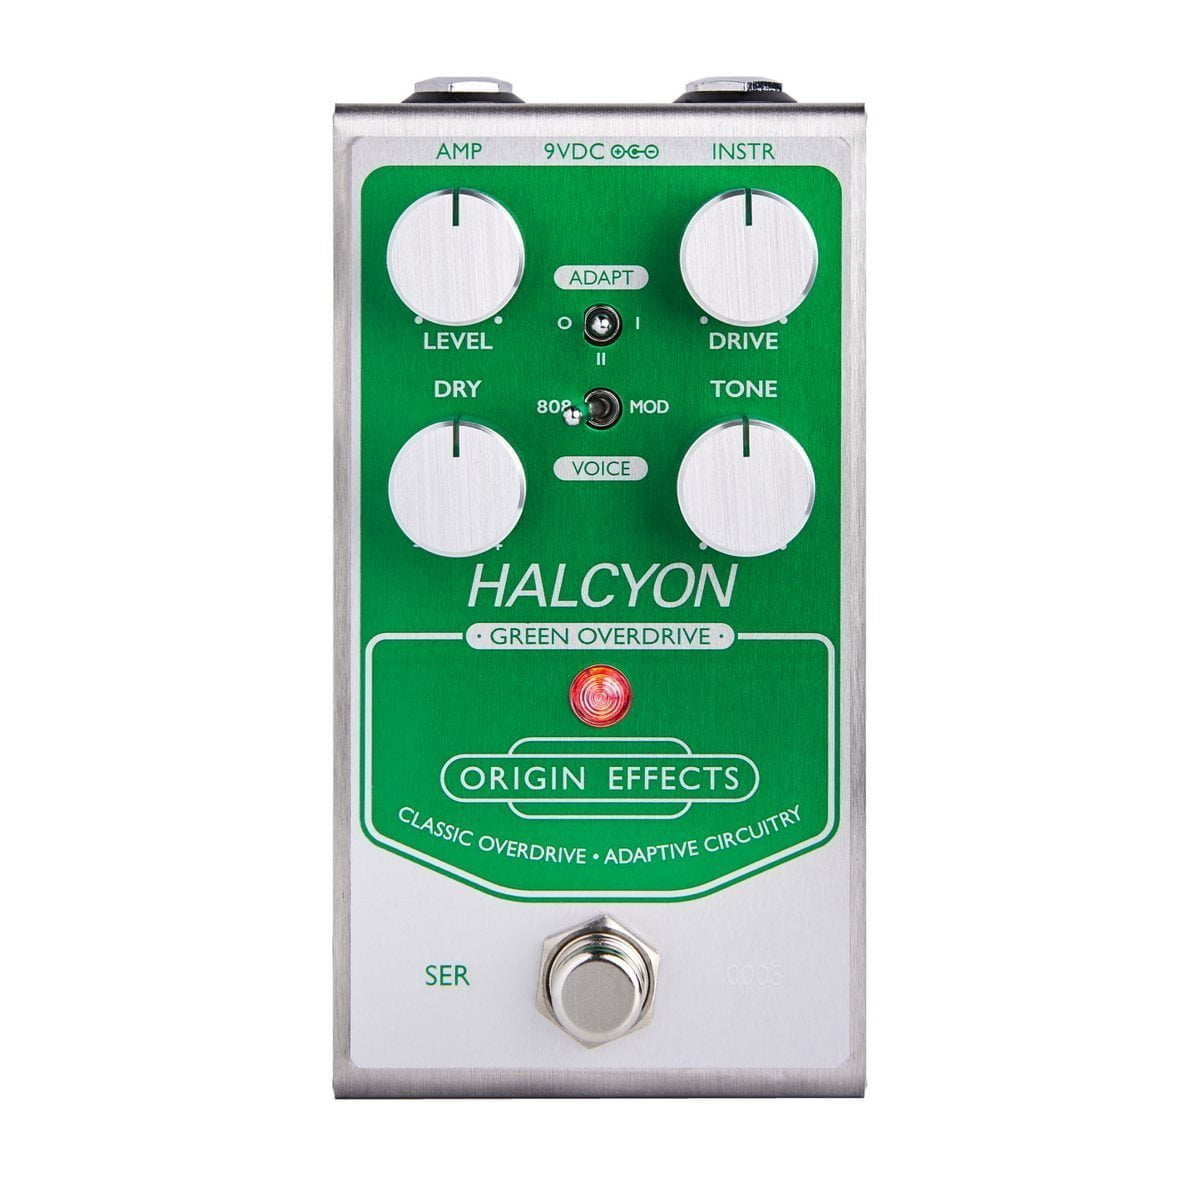 Origin Effects Halcyon Green Overdrive Front (web) On